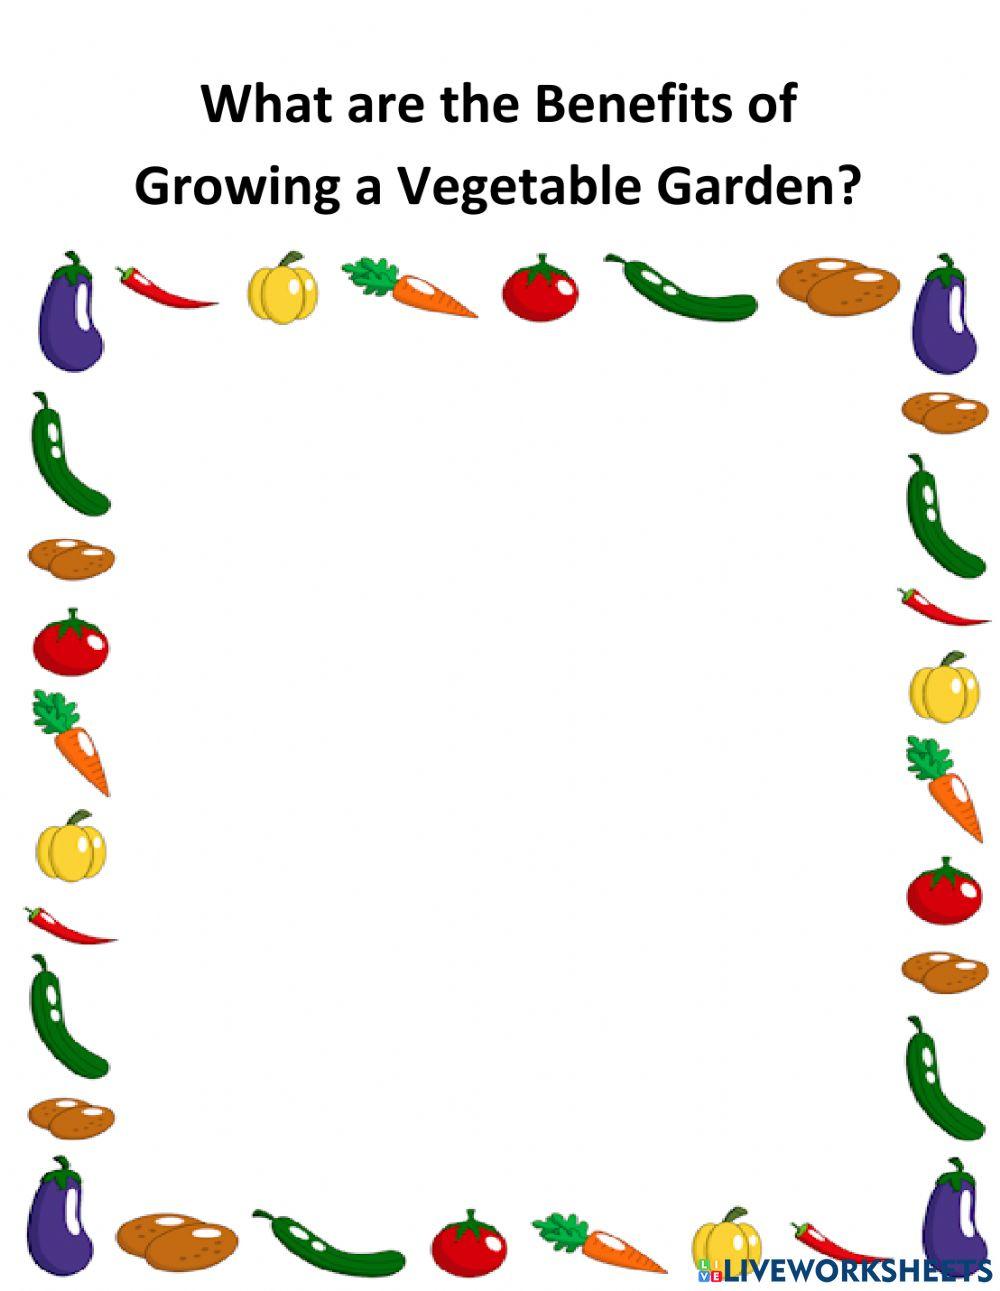 What are the Benefits of Growing a Vegetable Garden?